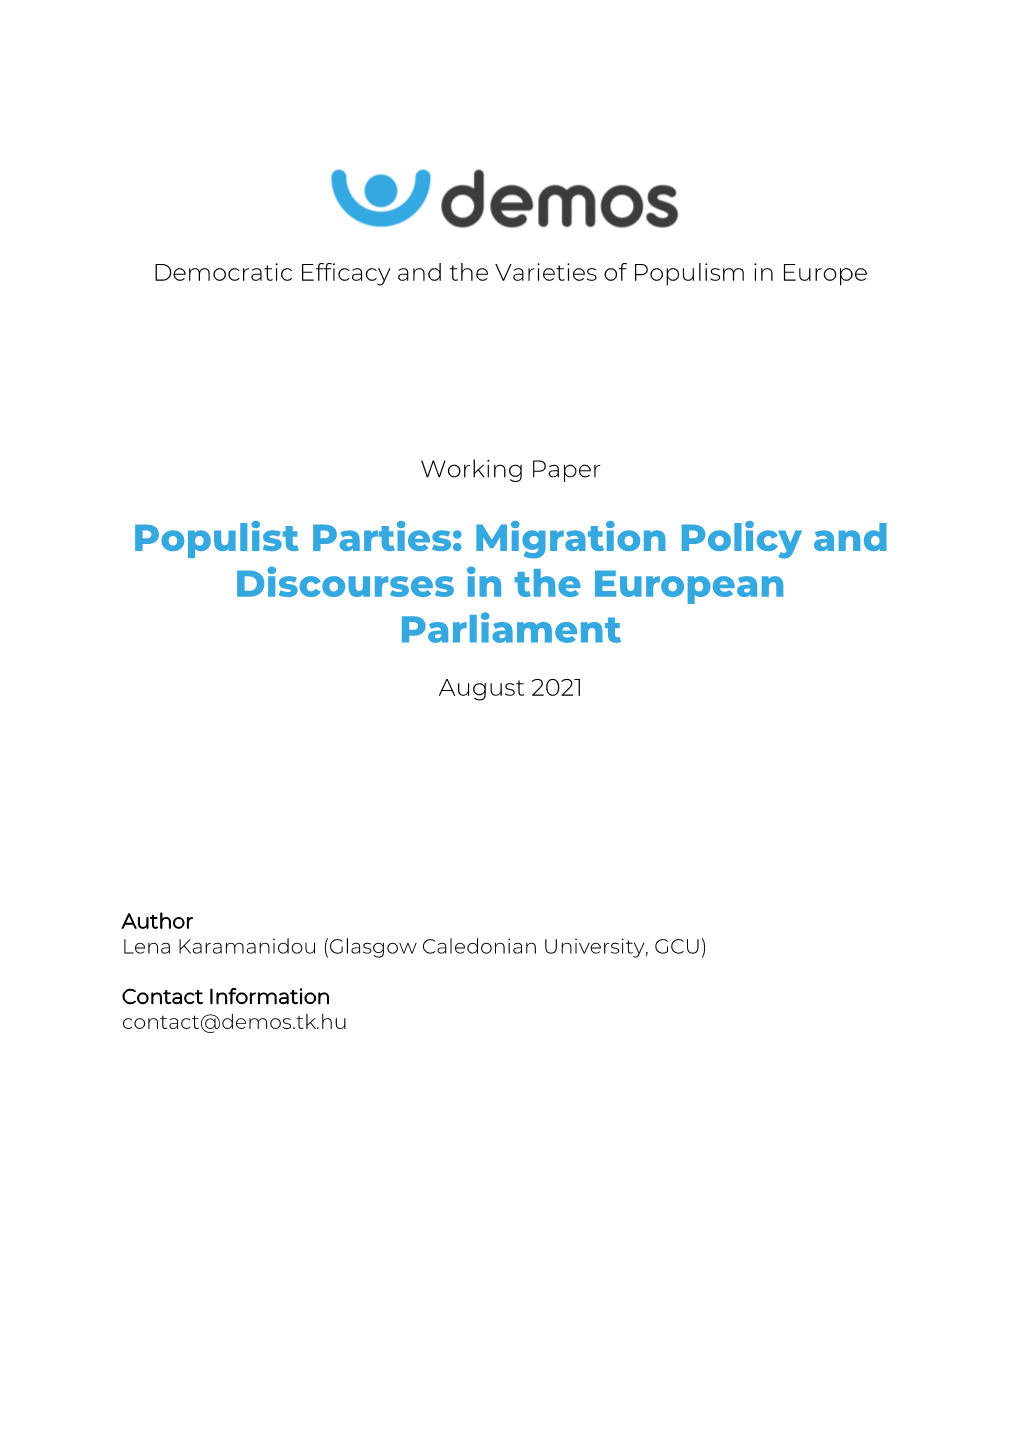 Populist Parties: Migration Policy and Discourses in the European Parliament